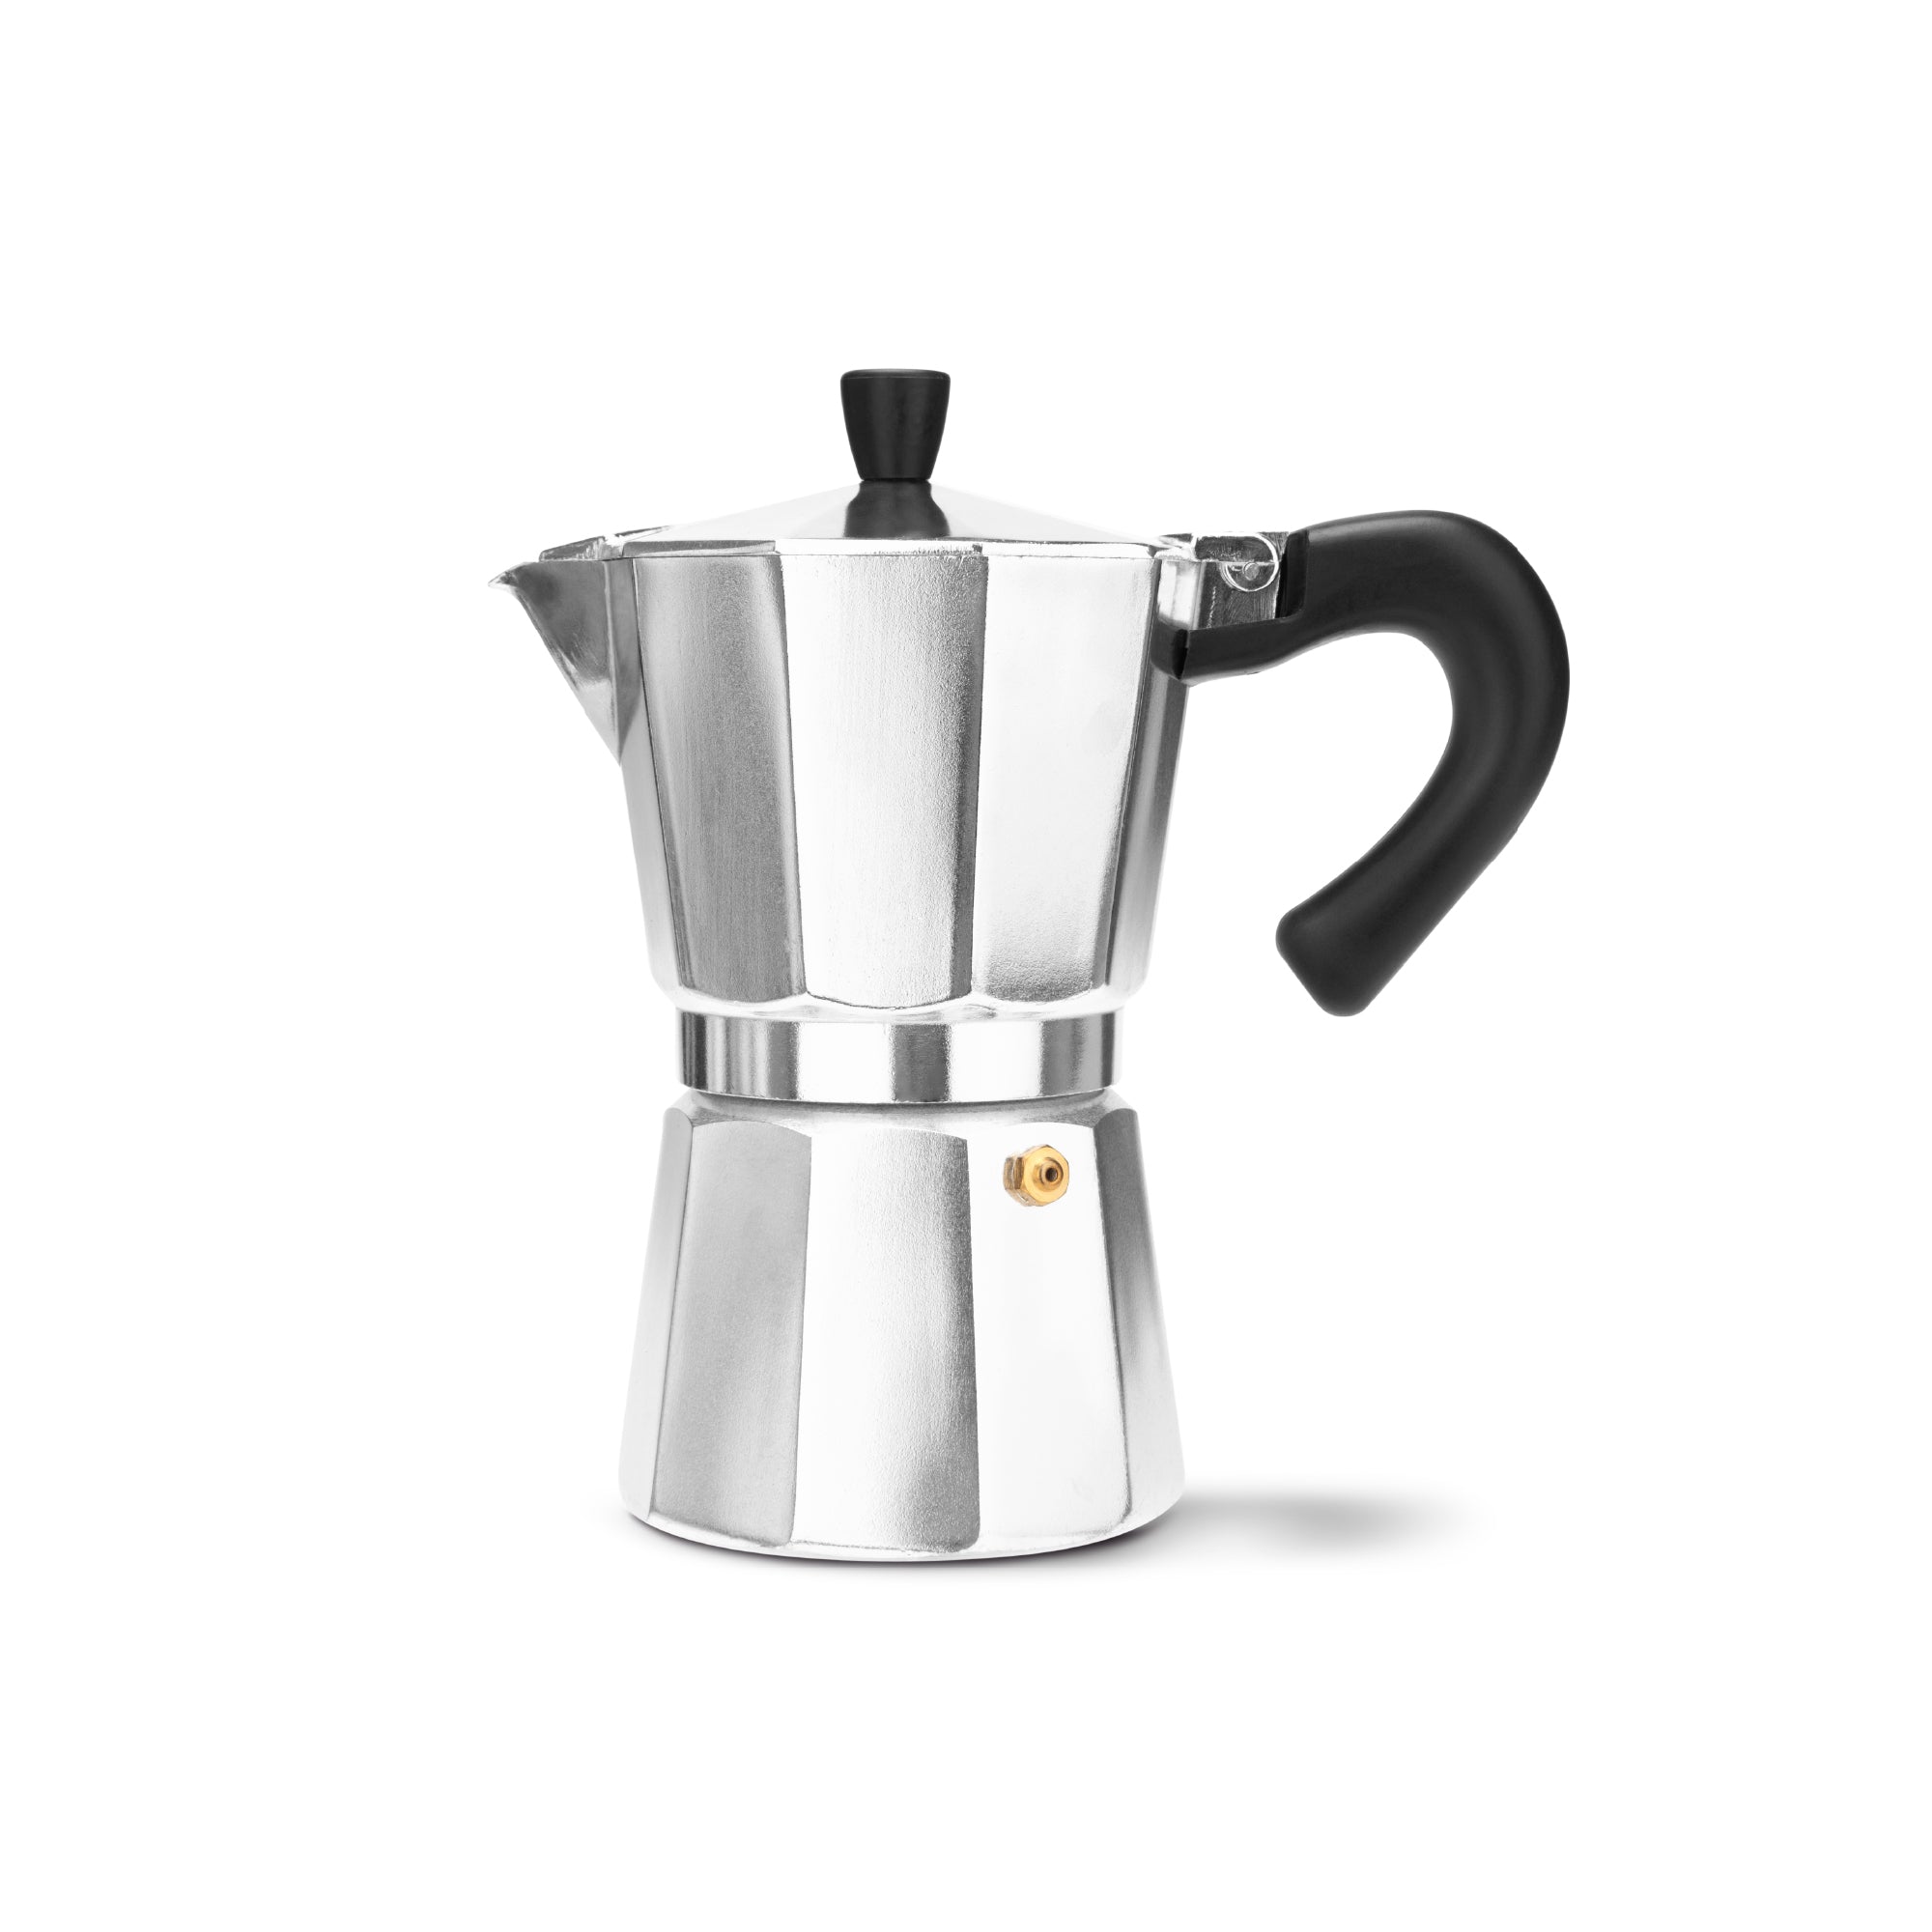 Stainless Steel Stovetop Espresso Maker